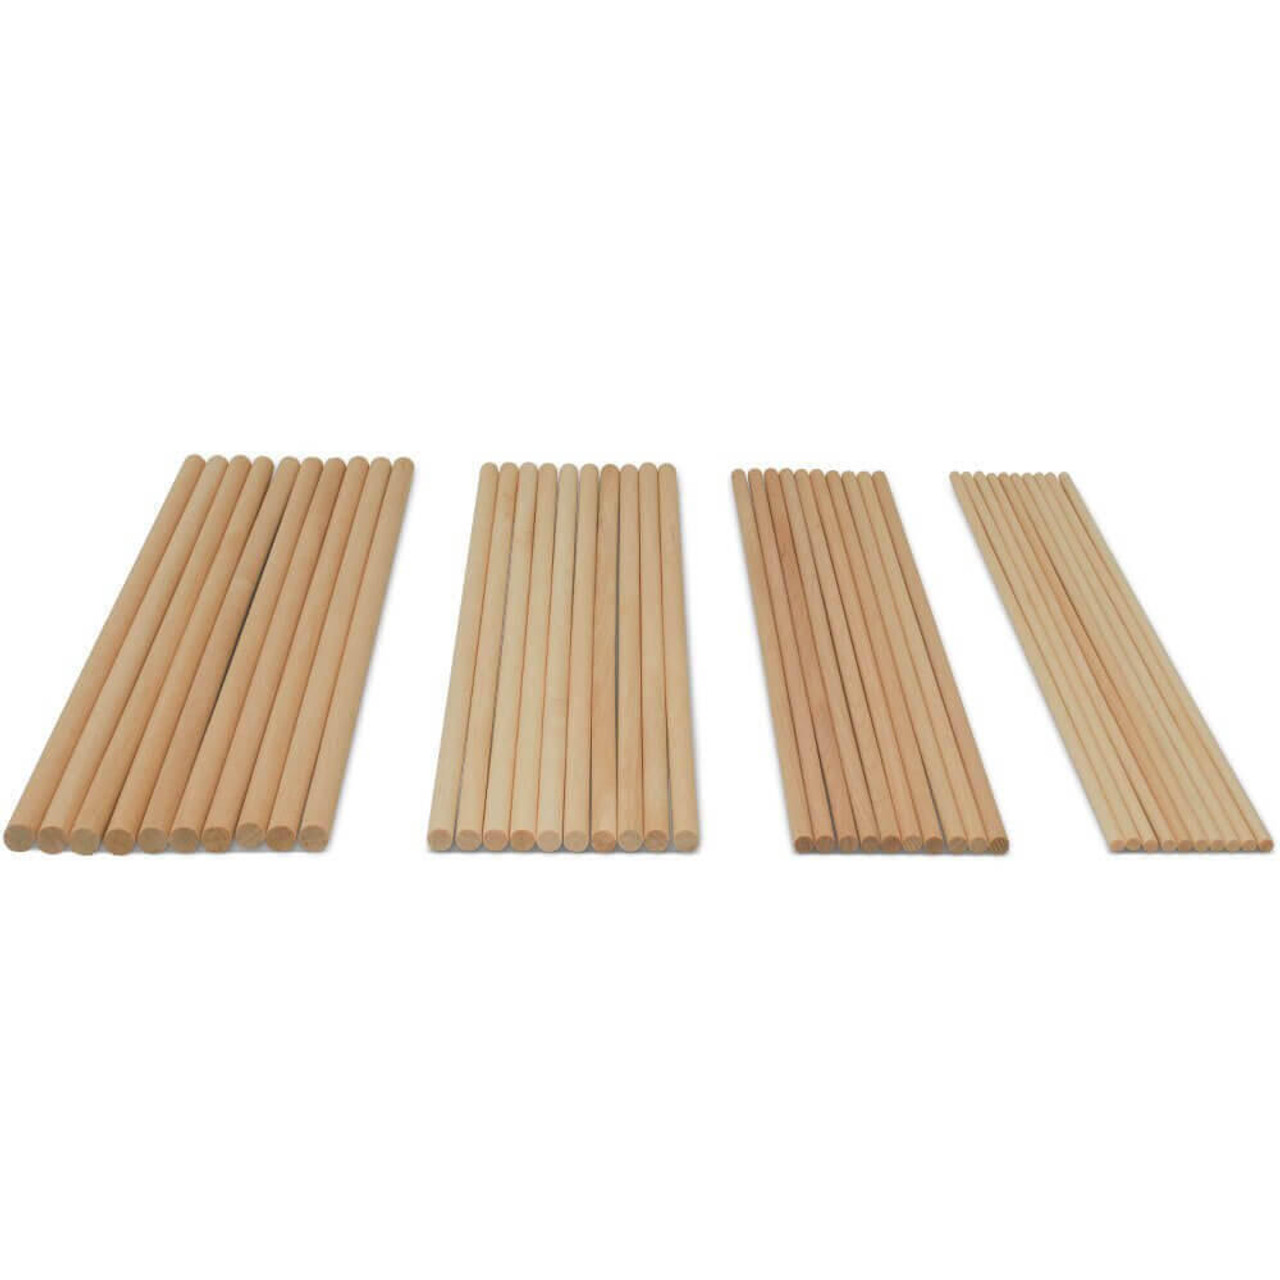 8 inches Wooden Dowel Rods, Set of 5, Wood Dowels